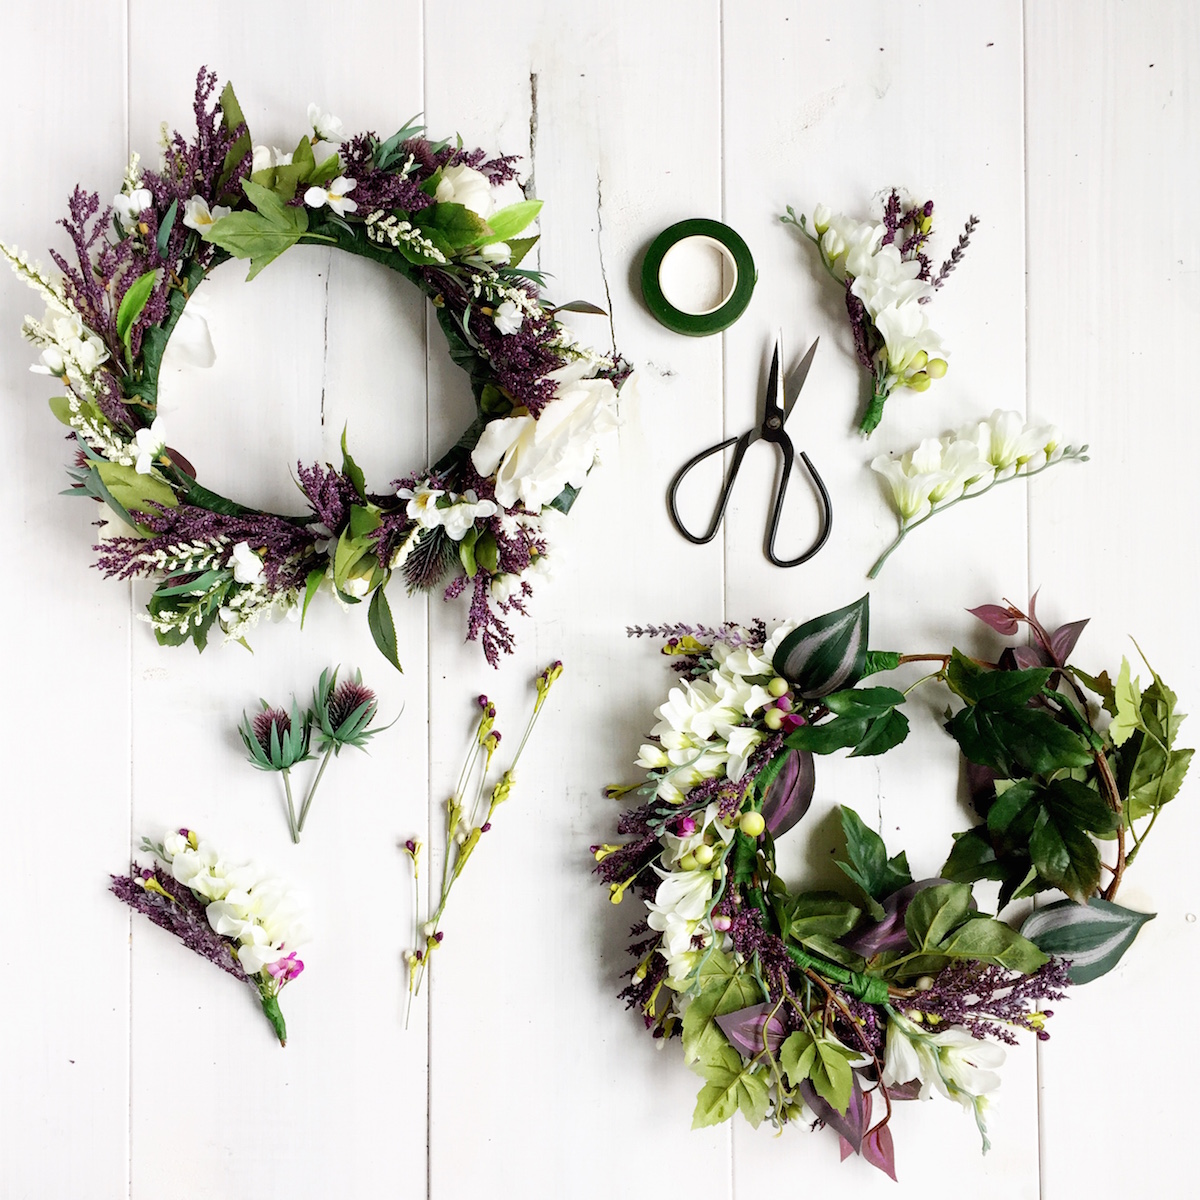 Celebrate Midsummer by making gorgeous flower crowns! You can use either fresh or silk flowers.